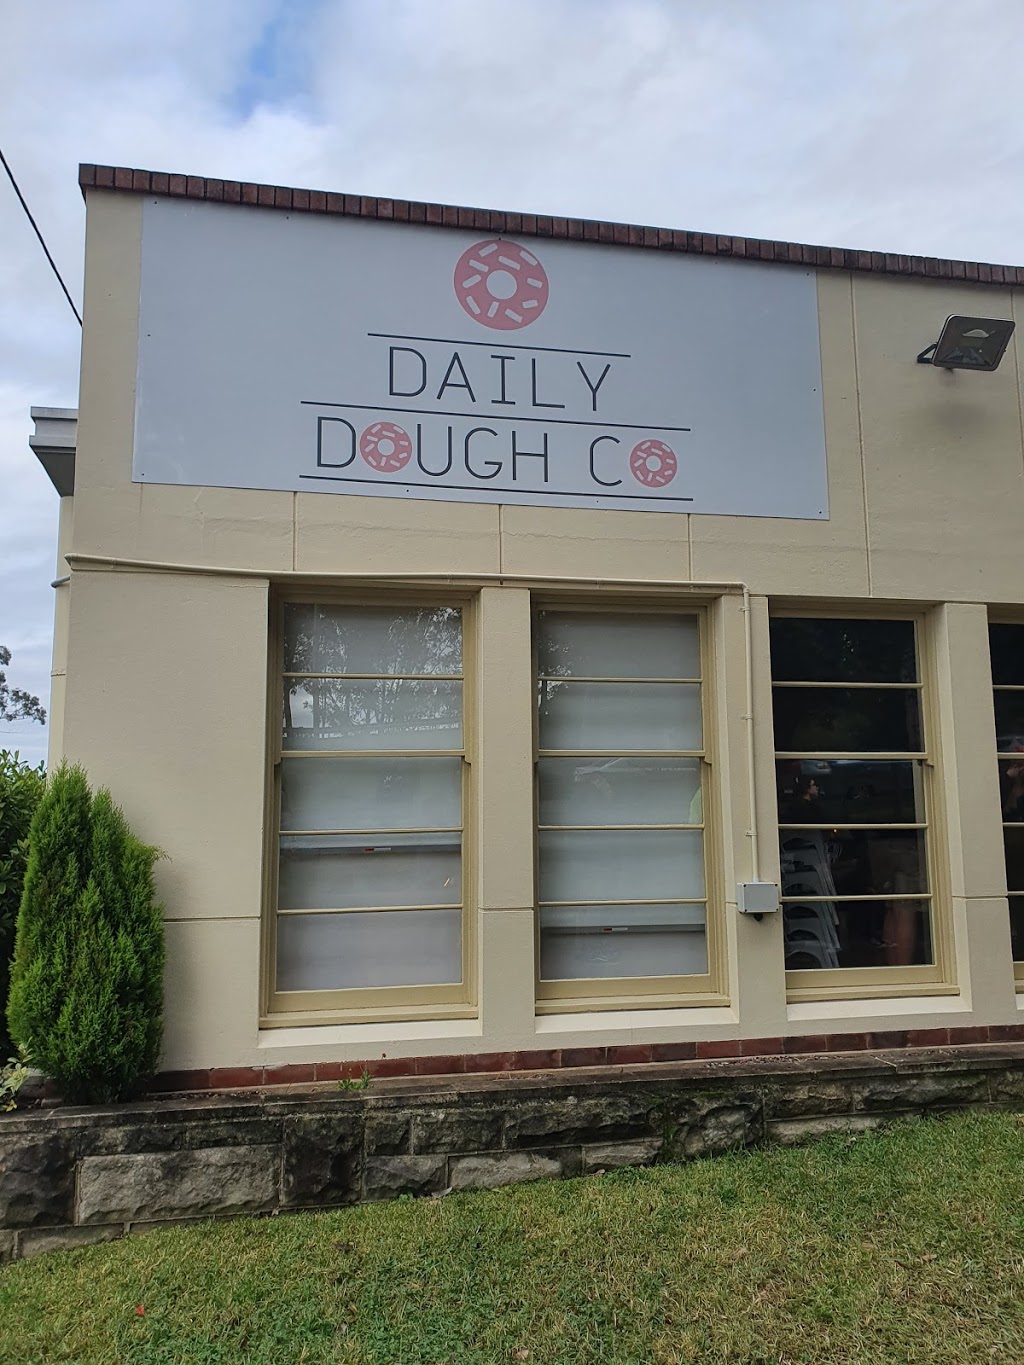 Daily Dough Co | cafe | 141 Alison Rd, Wyong NSW 2259, Australia | 0290641755 OR +61 2 9064 1755